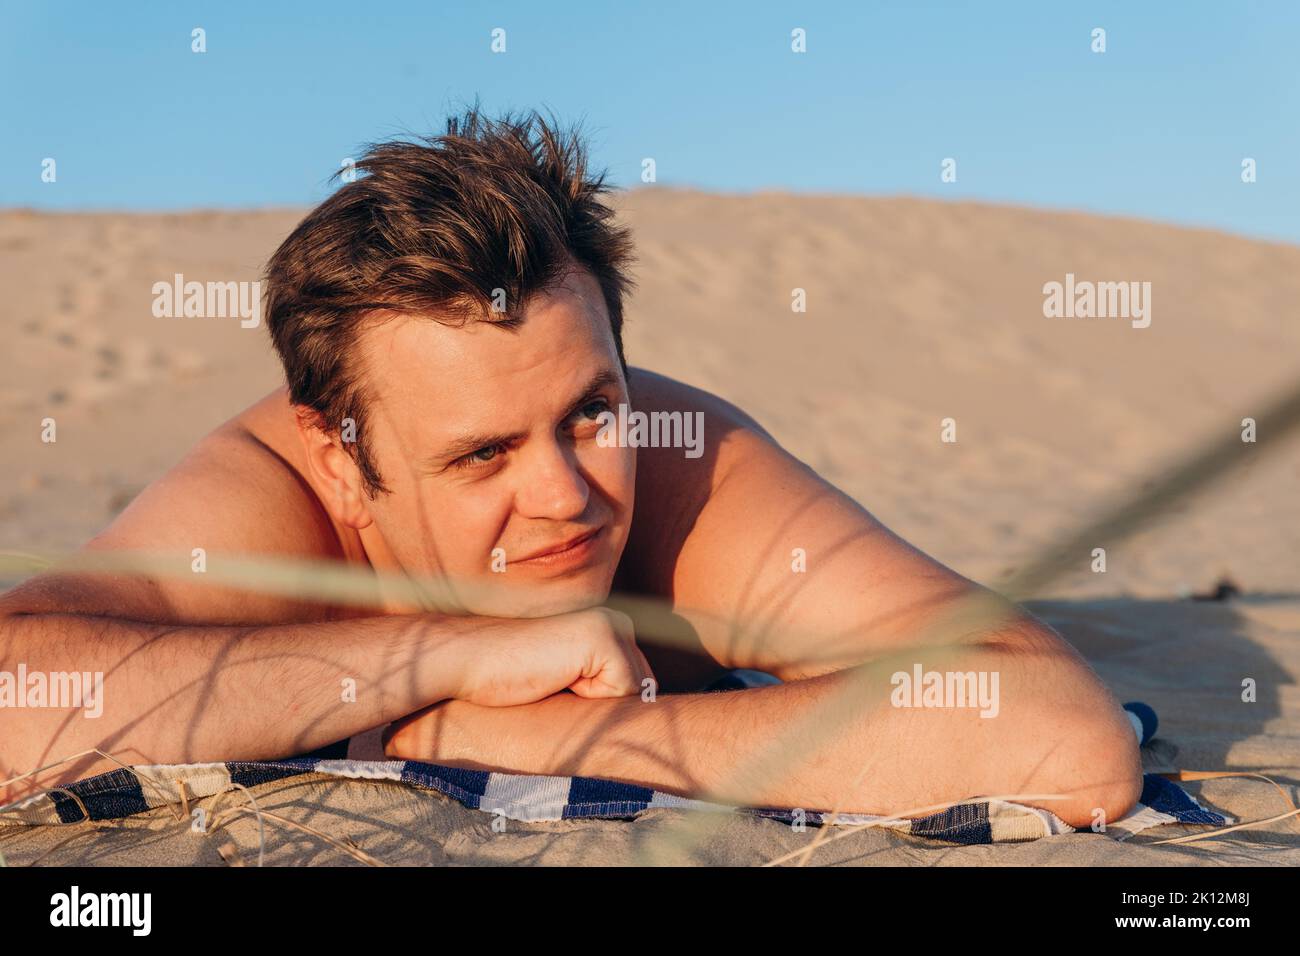 Looking away young 32 years old Caucasian man lies on striped towel and sunbathes on sandy beach on sand dune. Close-up summer headshot lifestyle thre Stock Photo